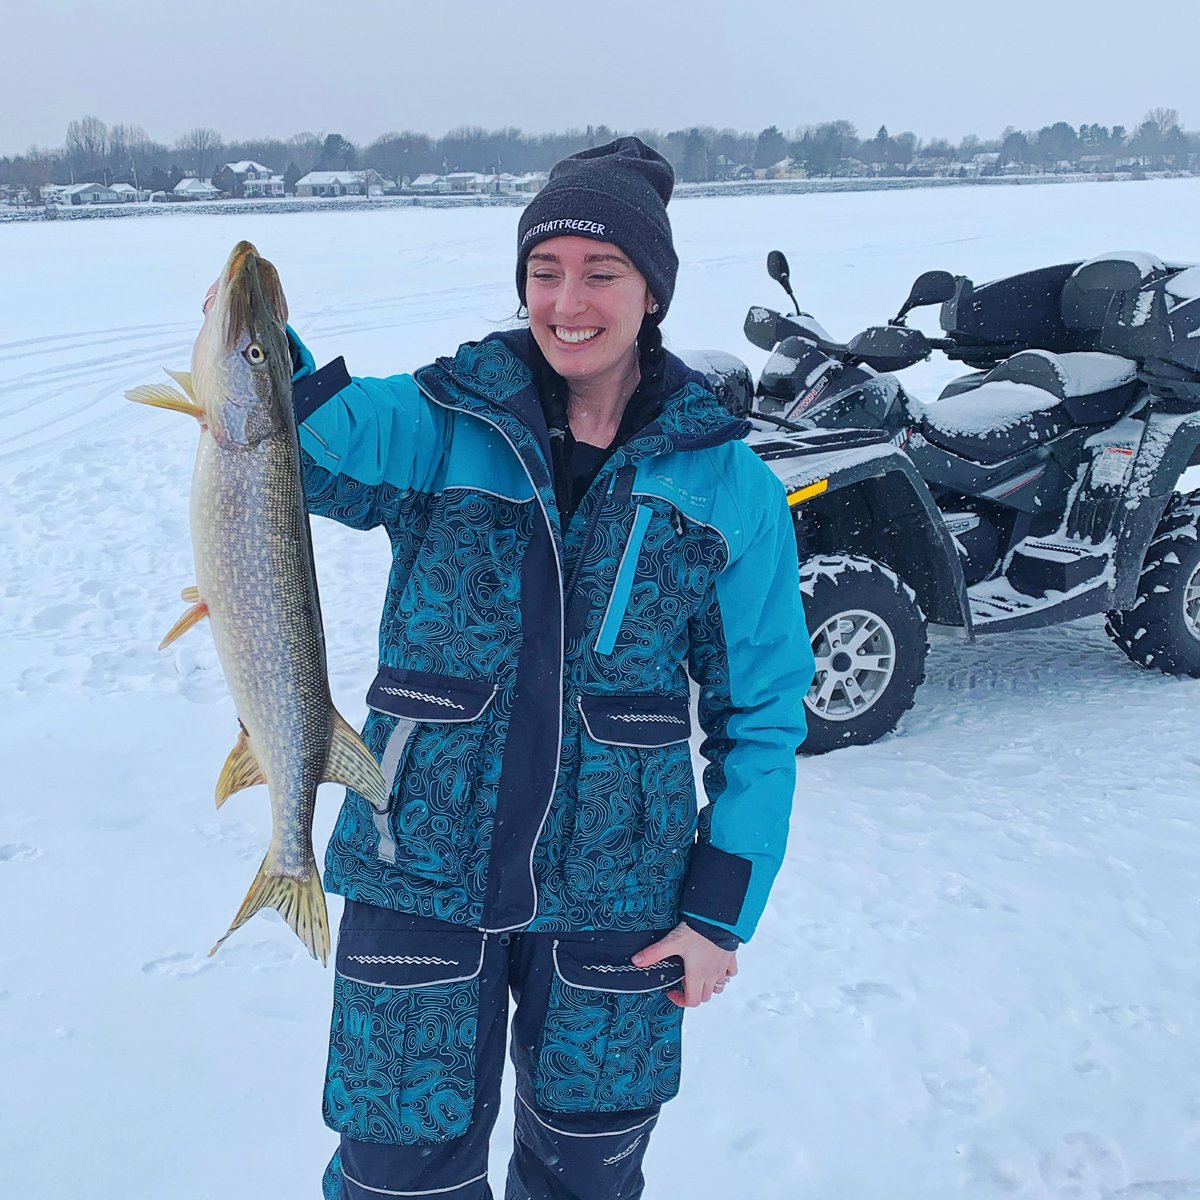 Been at least a year since I caught Mr. Pike, this one gave me a great fight! 
.
Follow @TRFisherwoman 
.
.
.
.
.
#pike #pikefishing #brochet #bigfishing #essox #fisherwoman #girlsfishtoo #womenfishtoo #icefishing #fishontheice #winterfishing #catchandcook